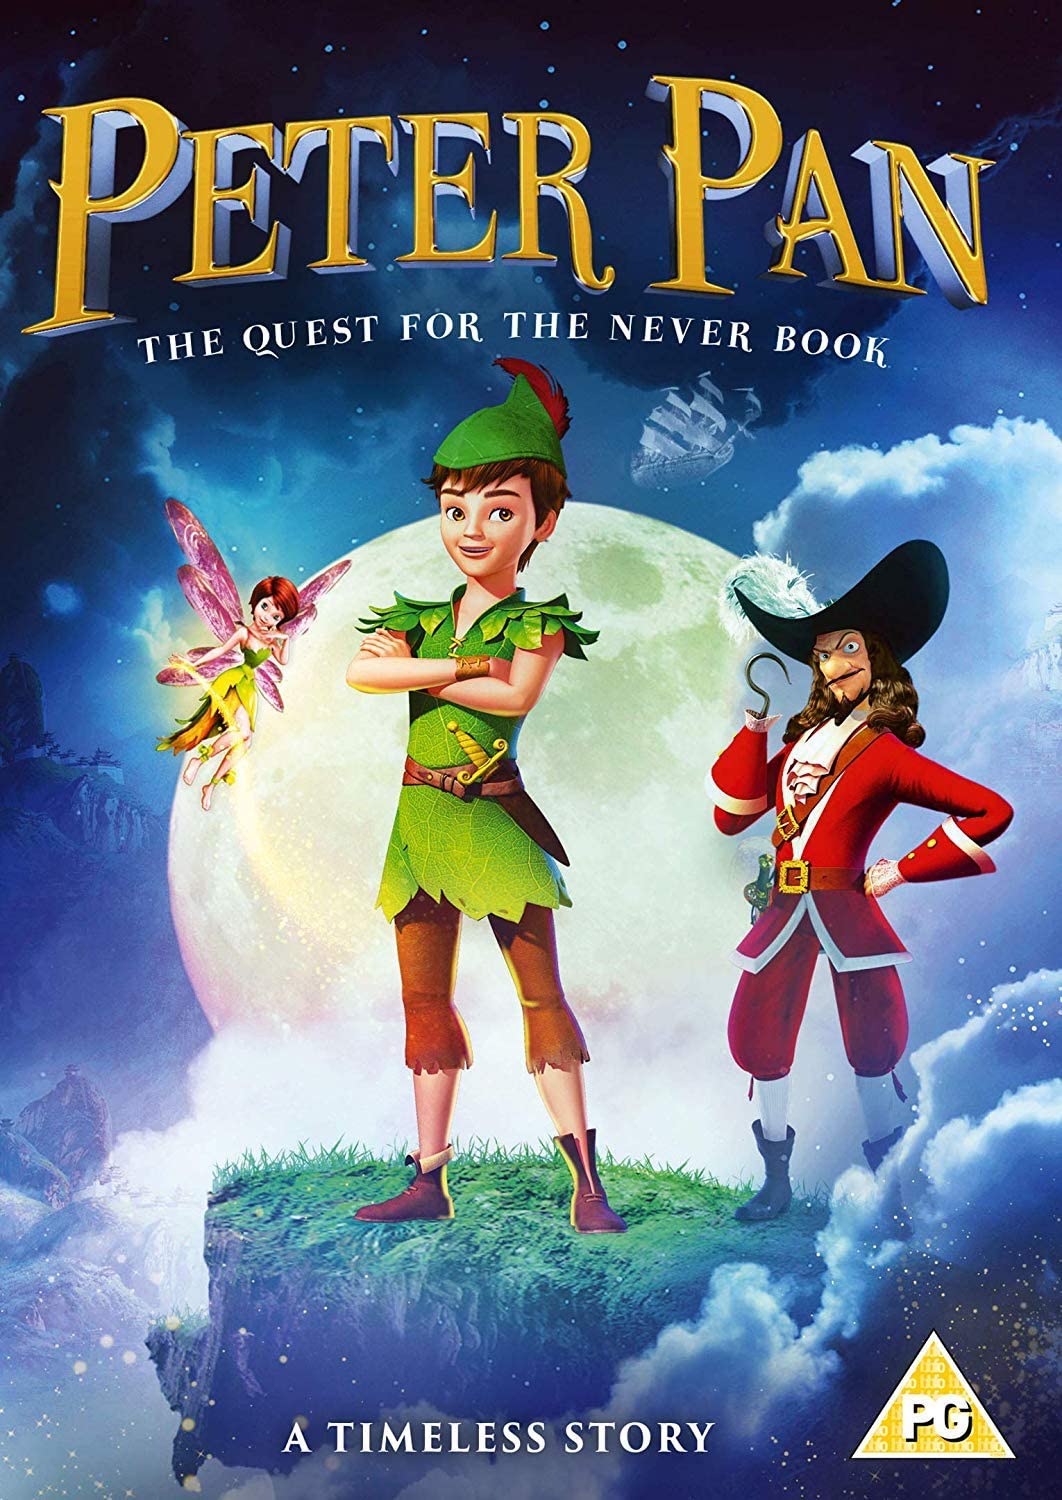 Peter Pan: The Quest for the Never Book – Fantasy [DVD]